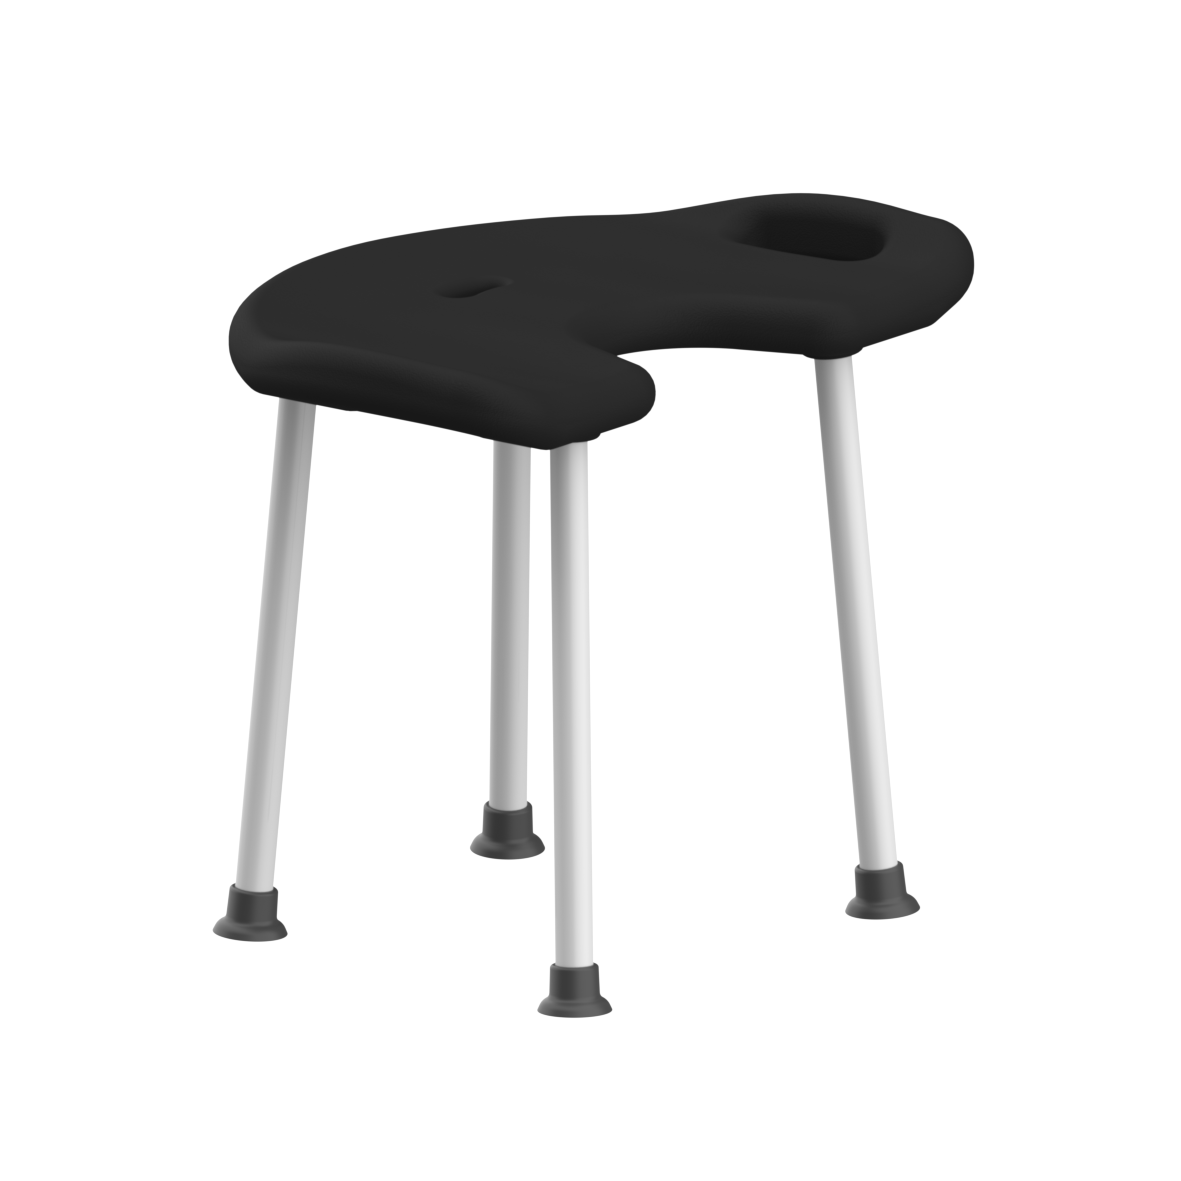 Nylon Care 300 Stool, with hygiene recess, 590 x 520 x 90 mm, White, padded, colour black